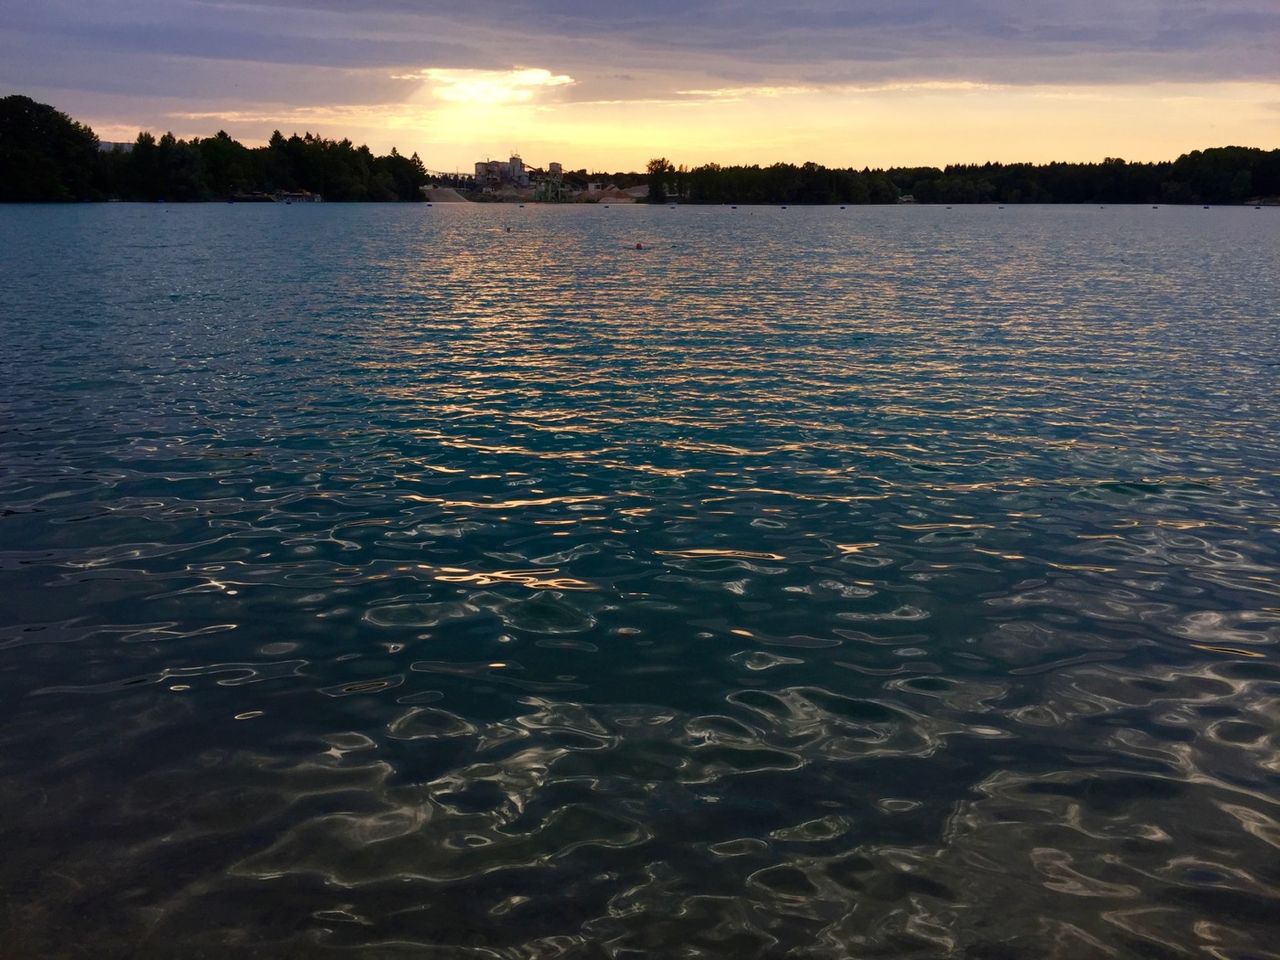 The sunset over the lake.